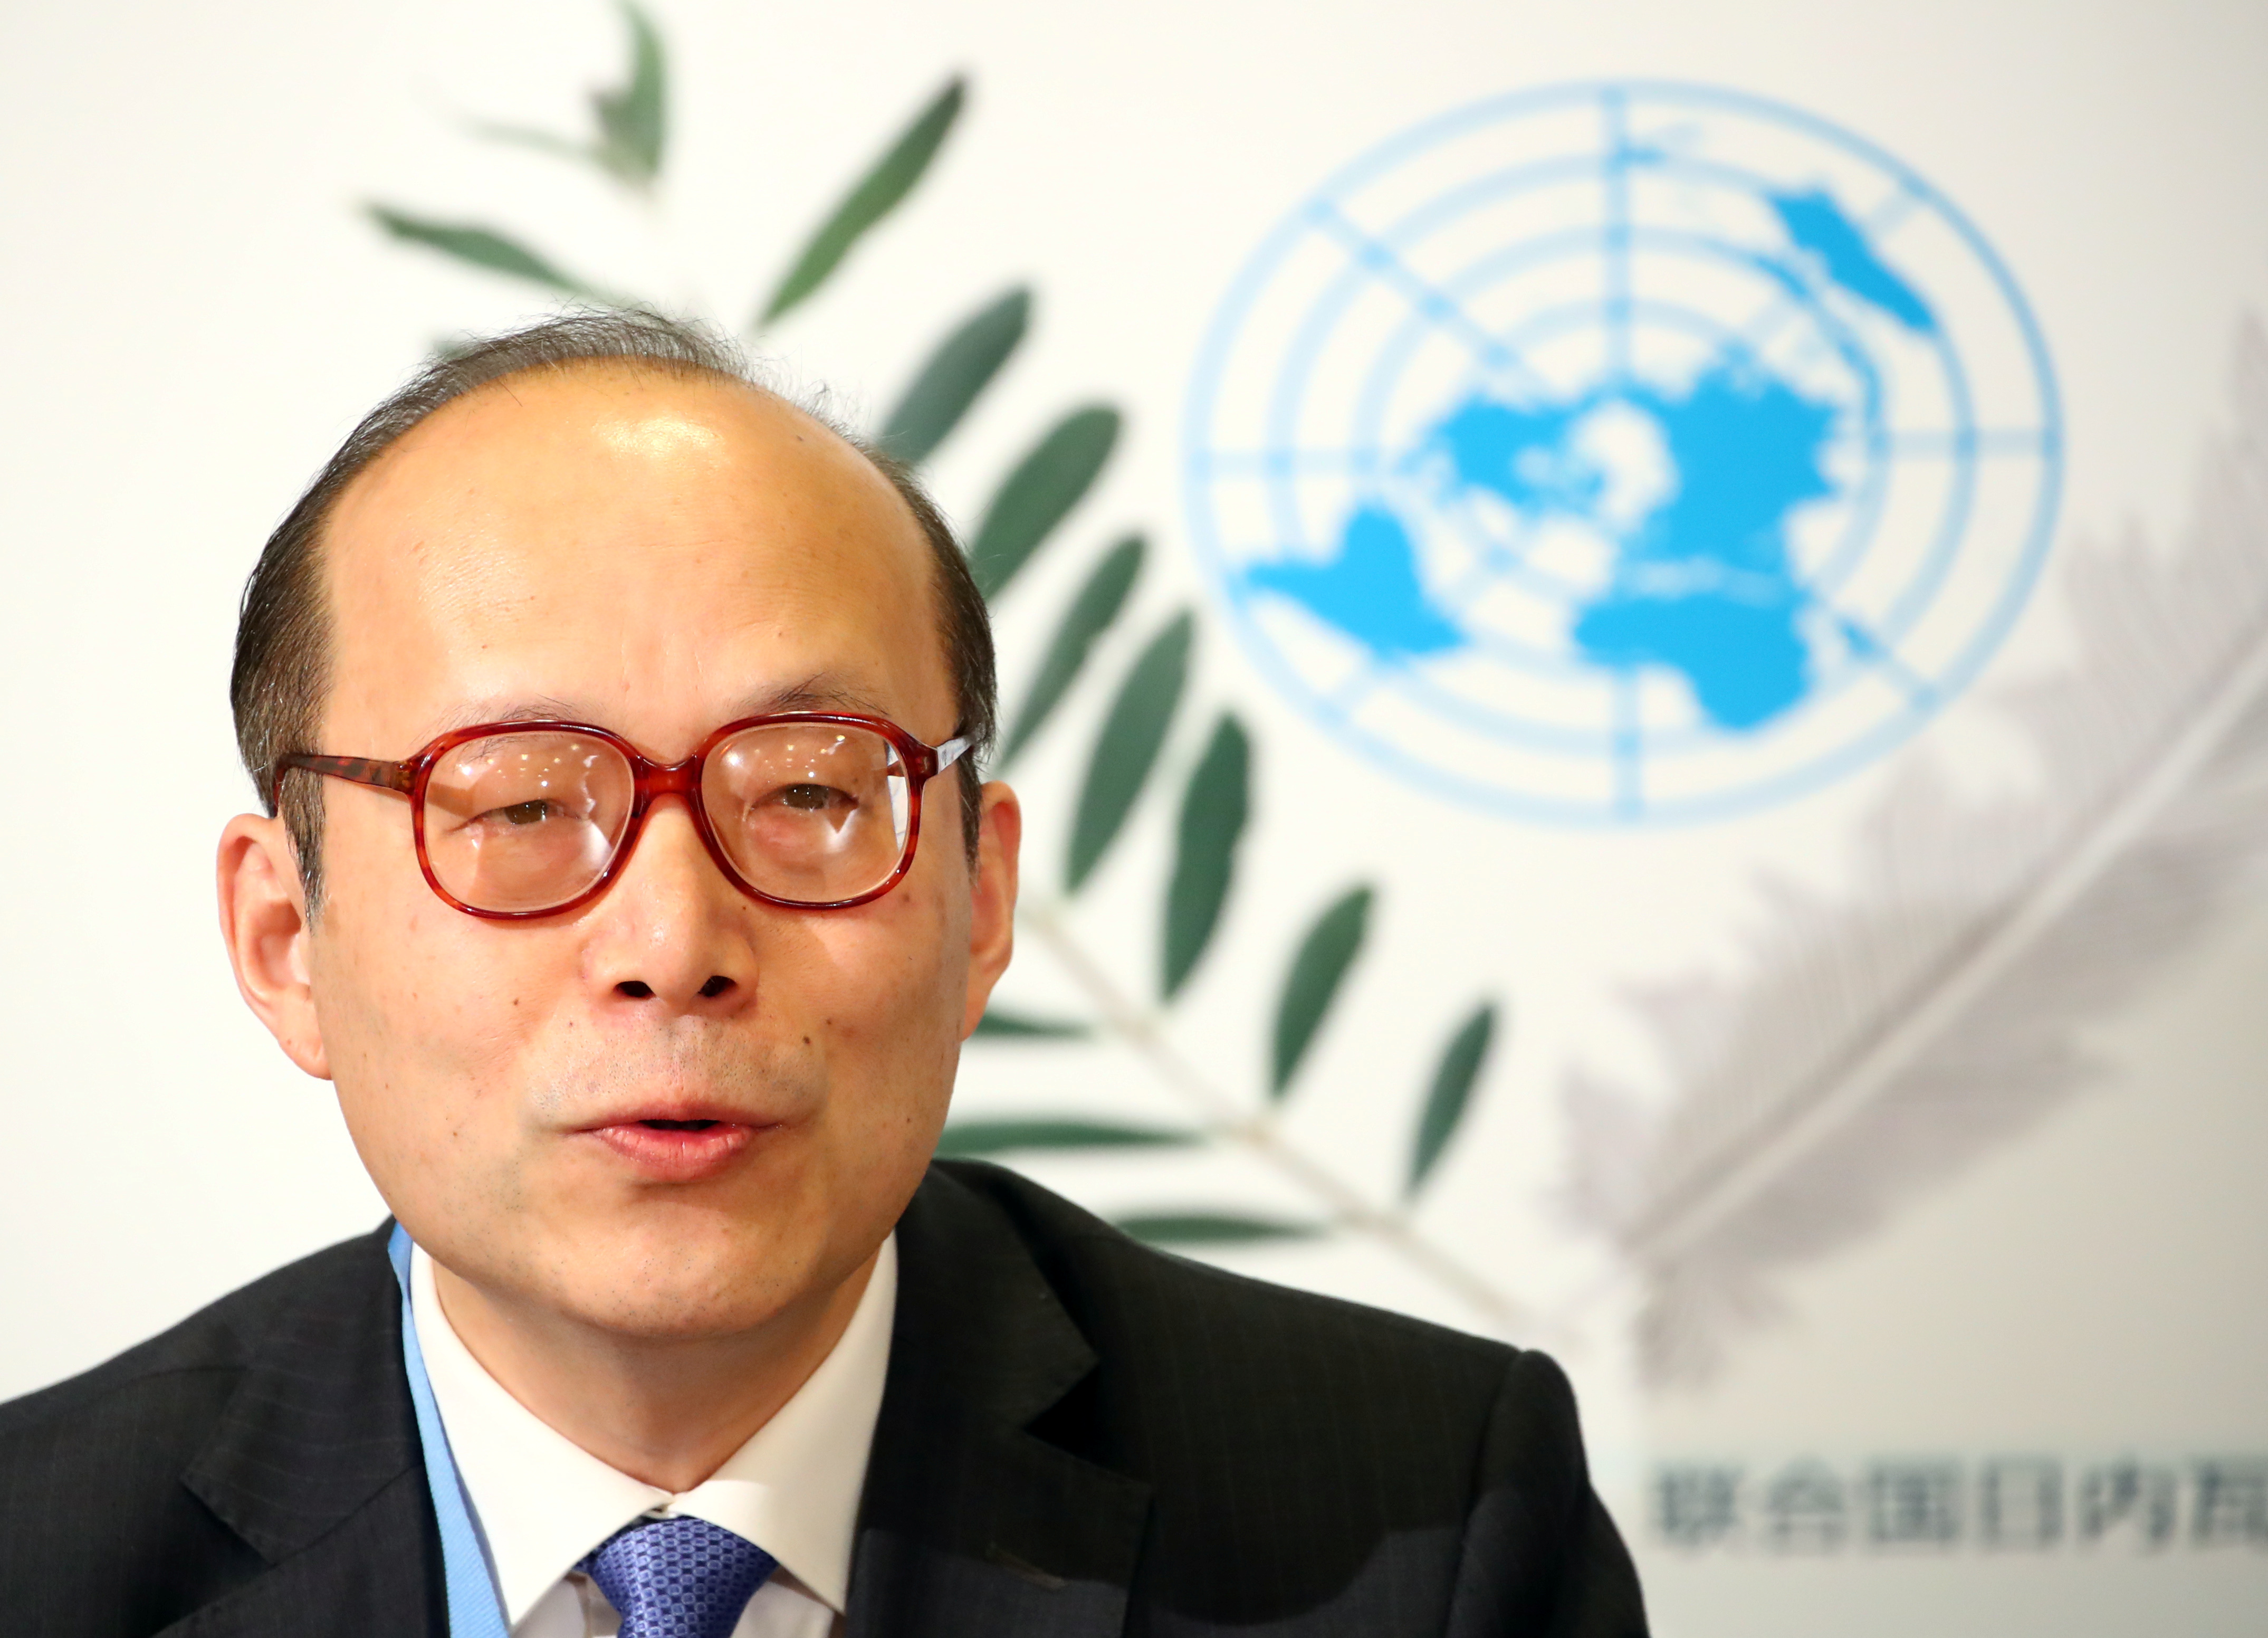 Ambassador of China to the UN Xu attends a news conference on coronavirus in Geneva